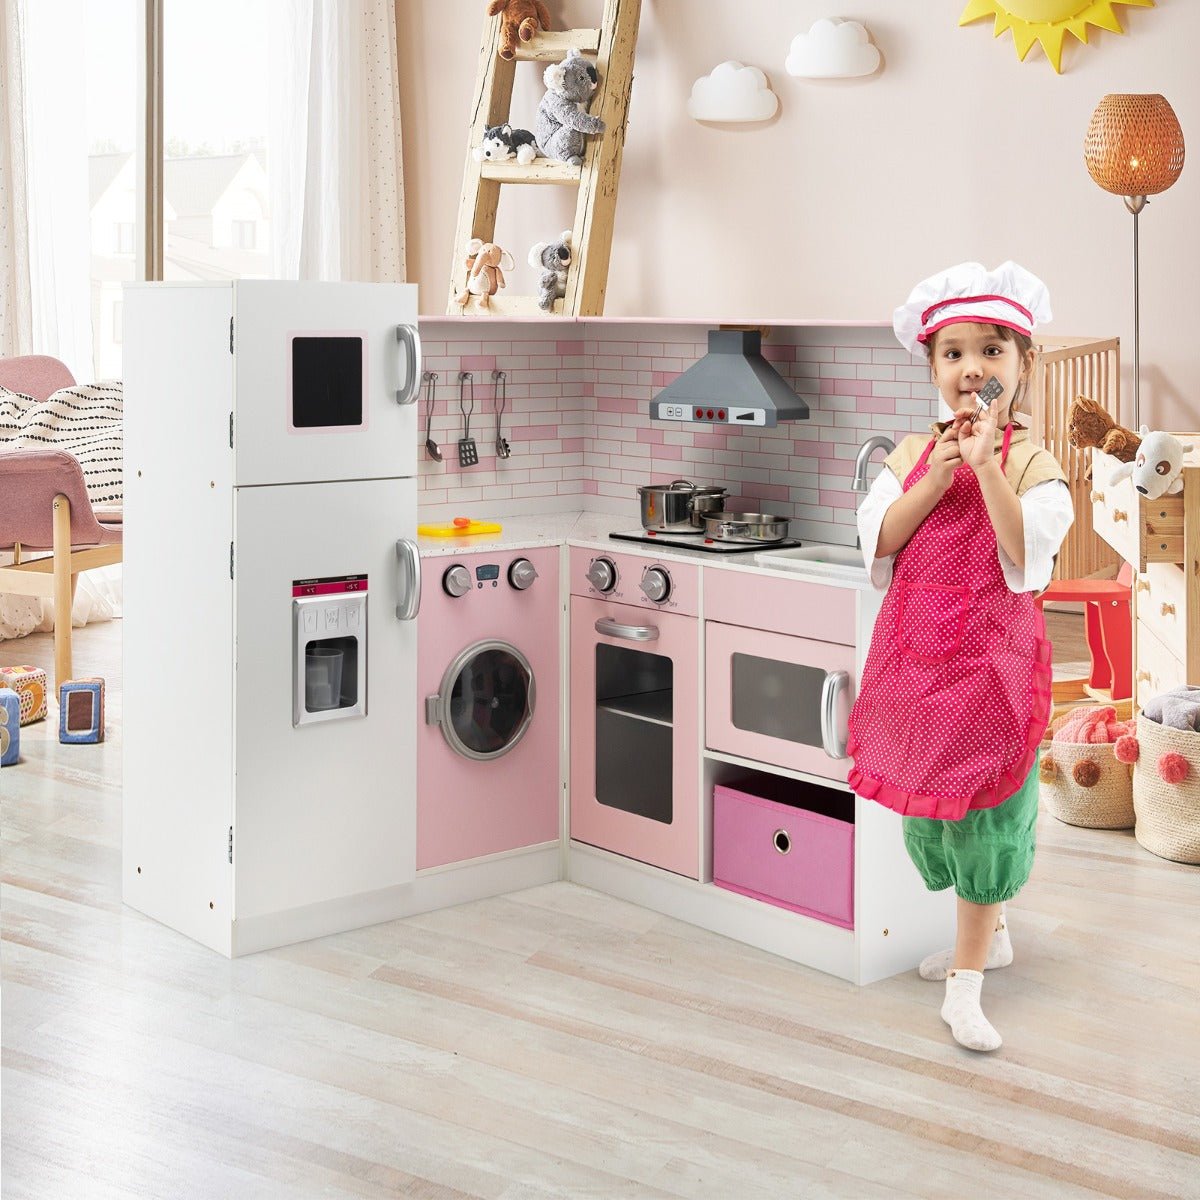 Imaginative Cooking: Kids Kitchen Pretend Play Set with Cookware & Apron